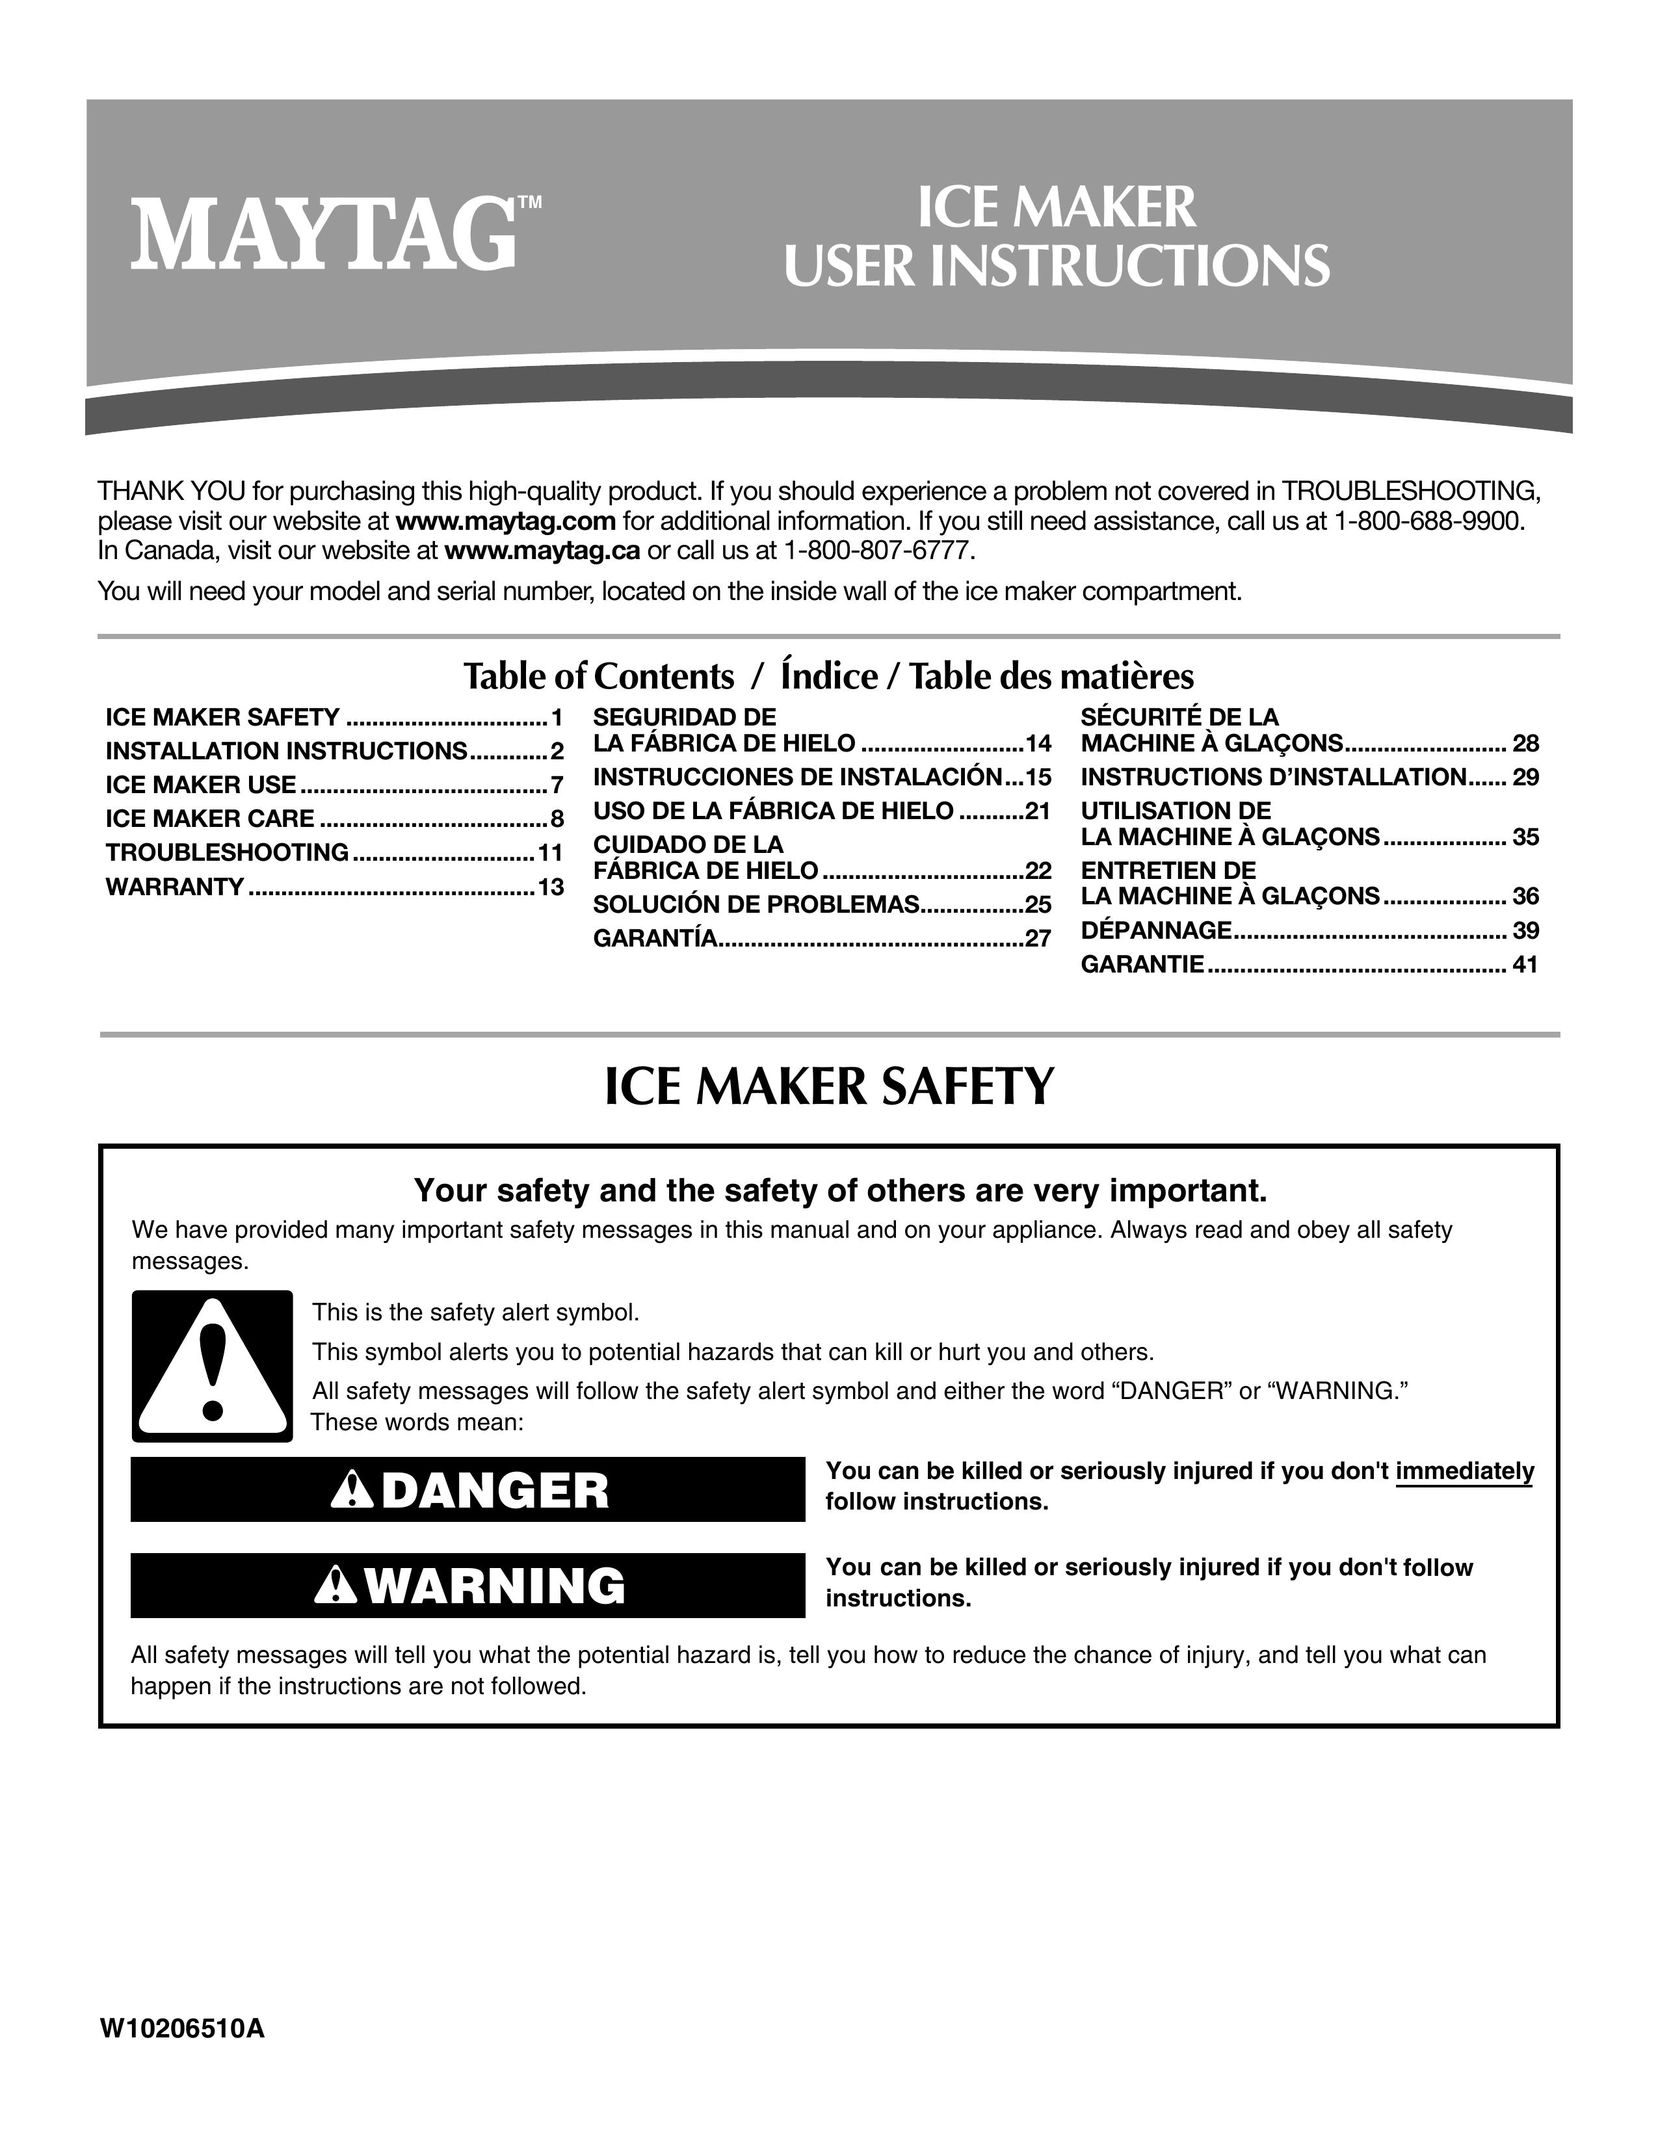 Maytag W10206488A Ice Maker User Manual